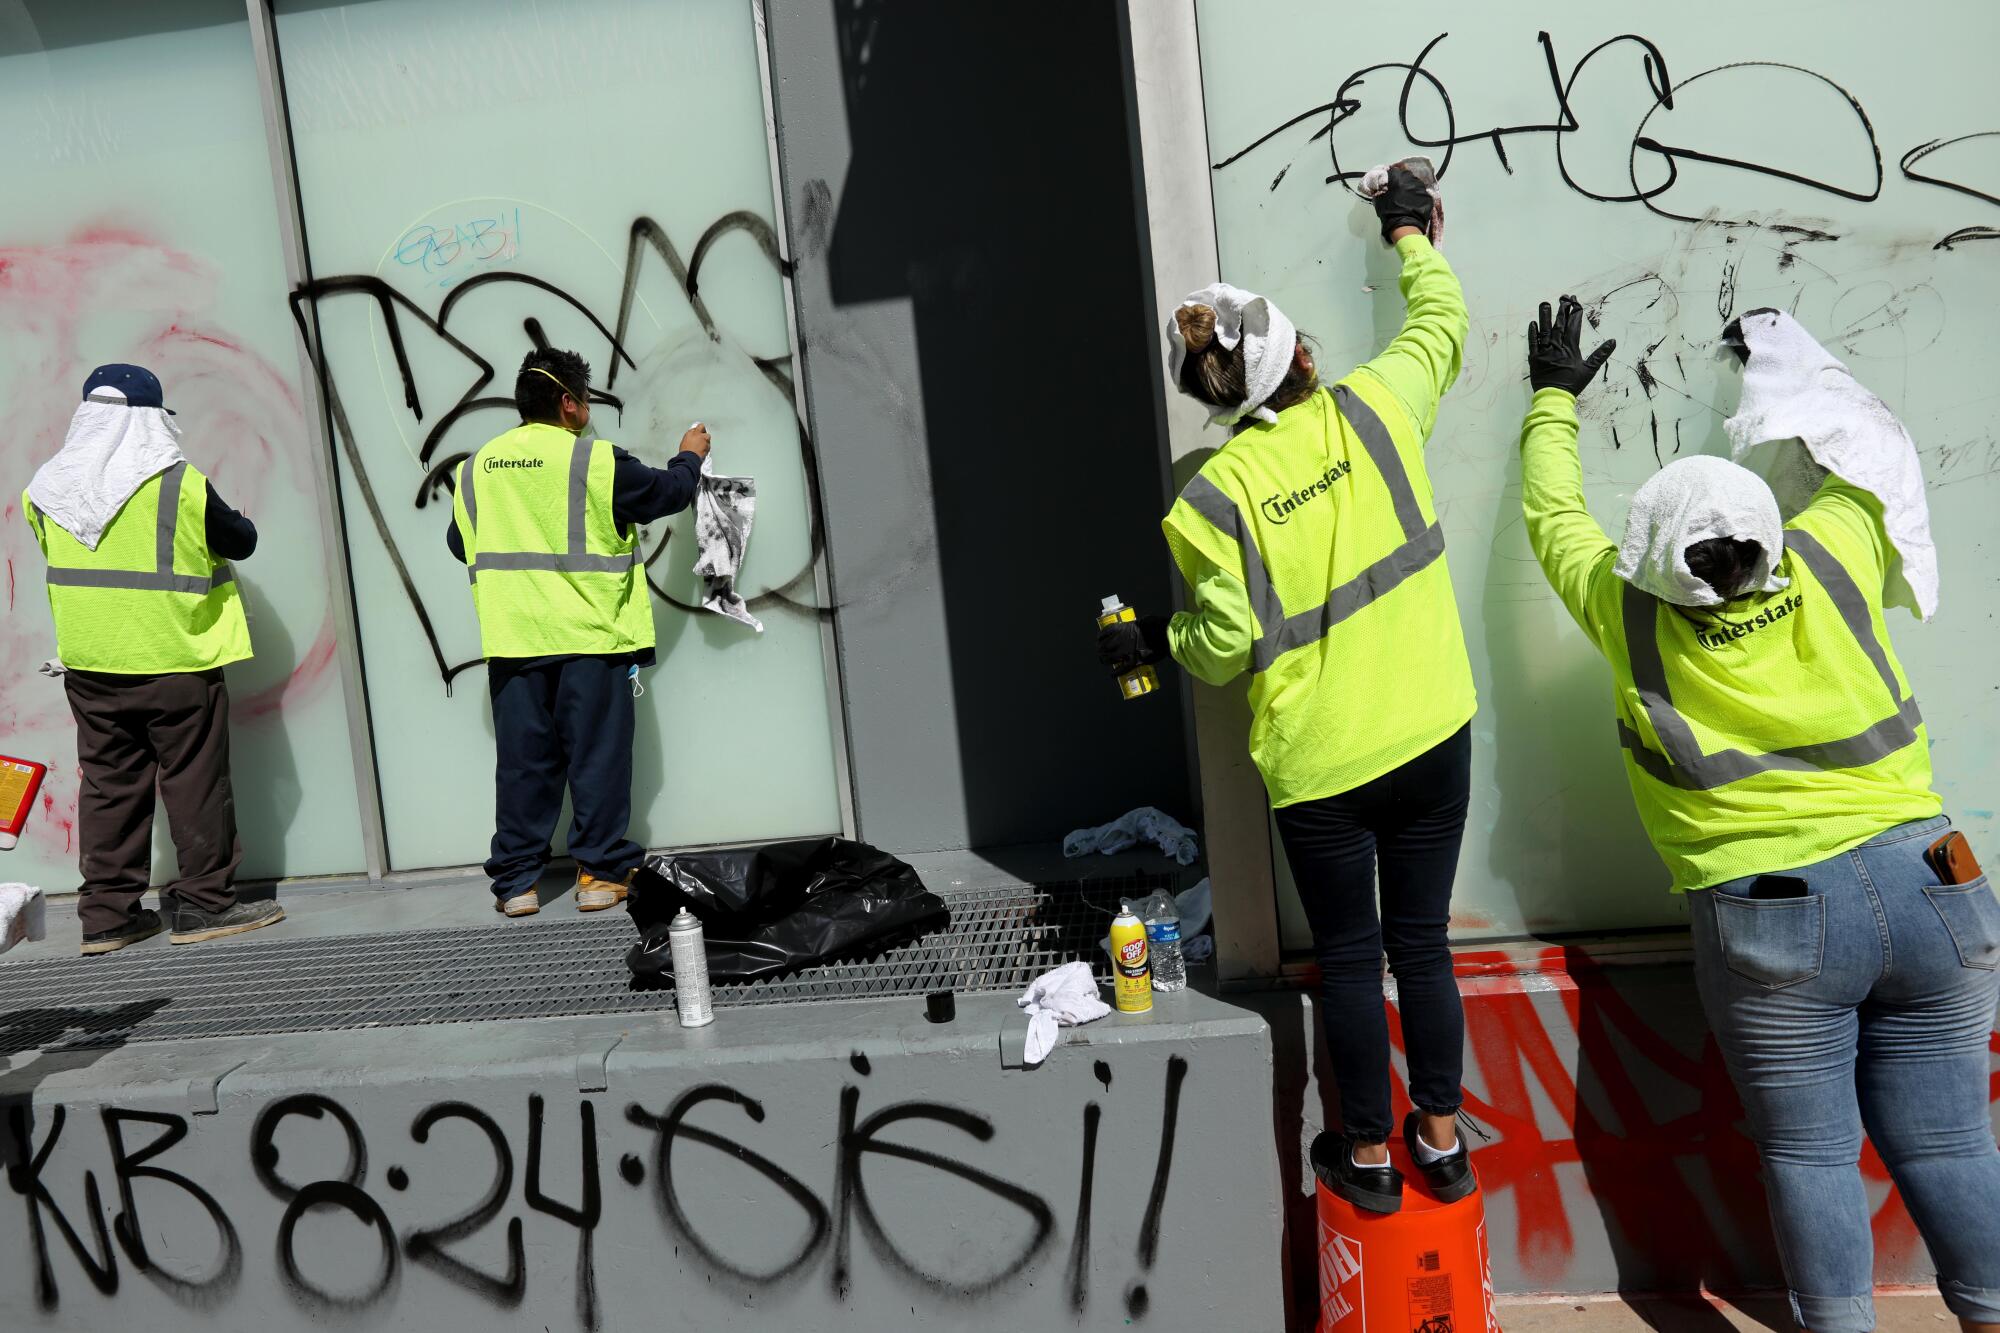 Interstate Restoration workers wash off graffiti on the Renaissance Tower apartment building on Olympic Boulevard.